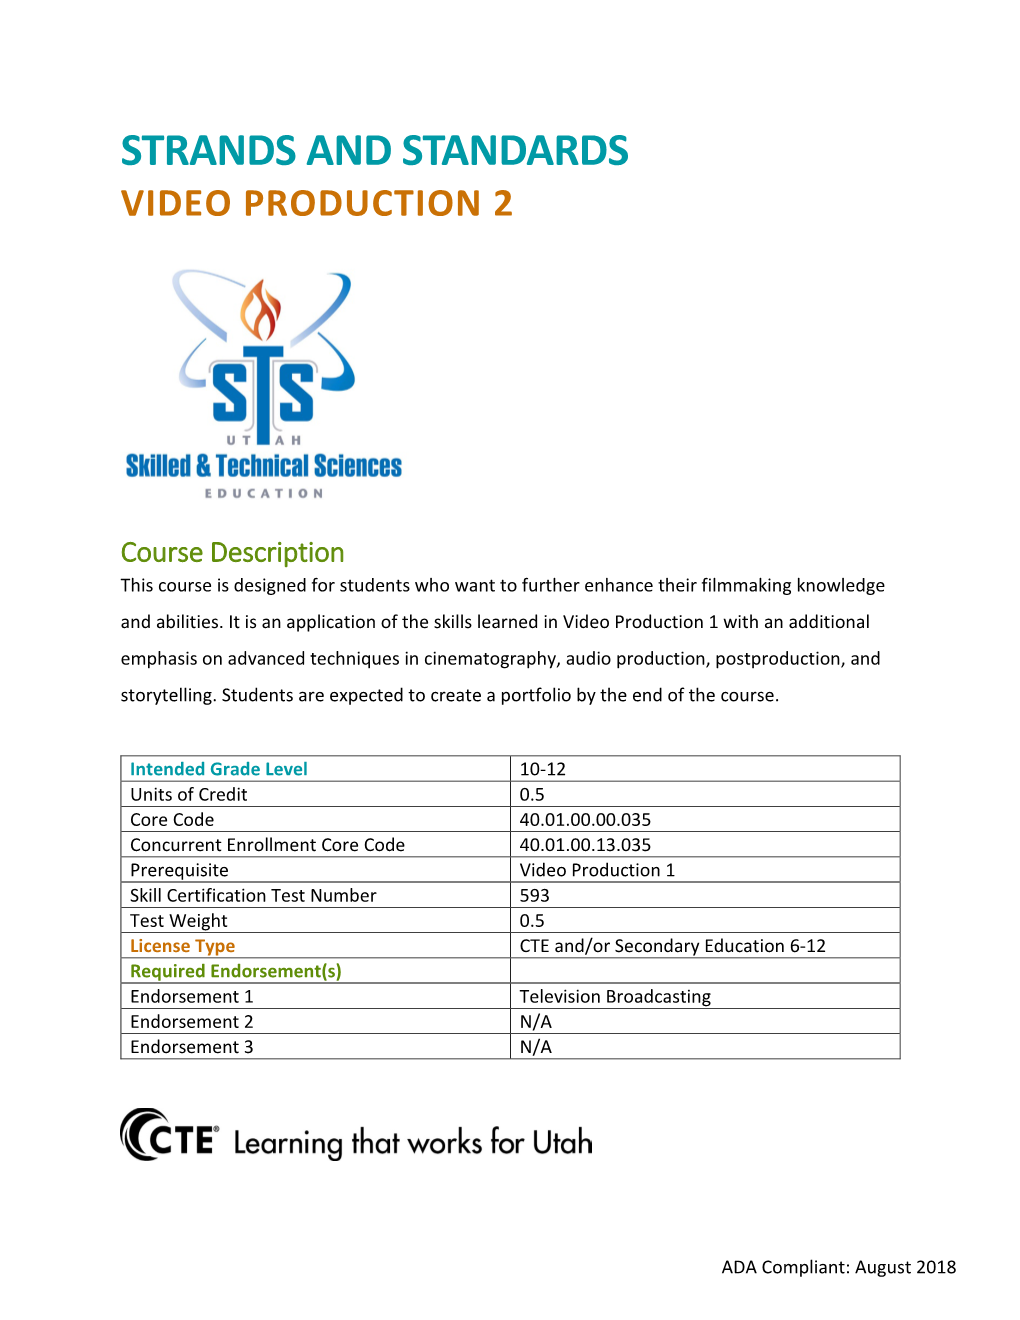 Video Production 2 Strands and Standards